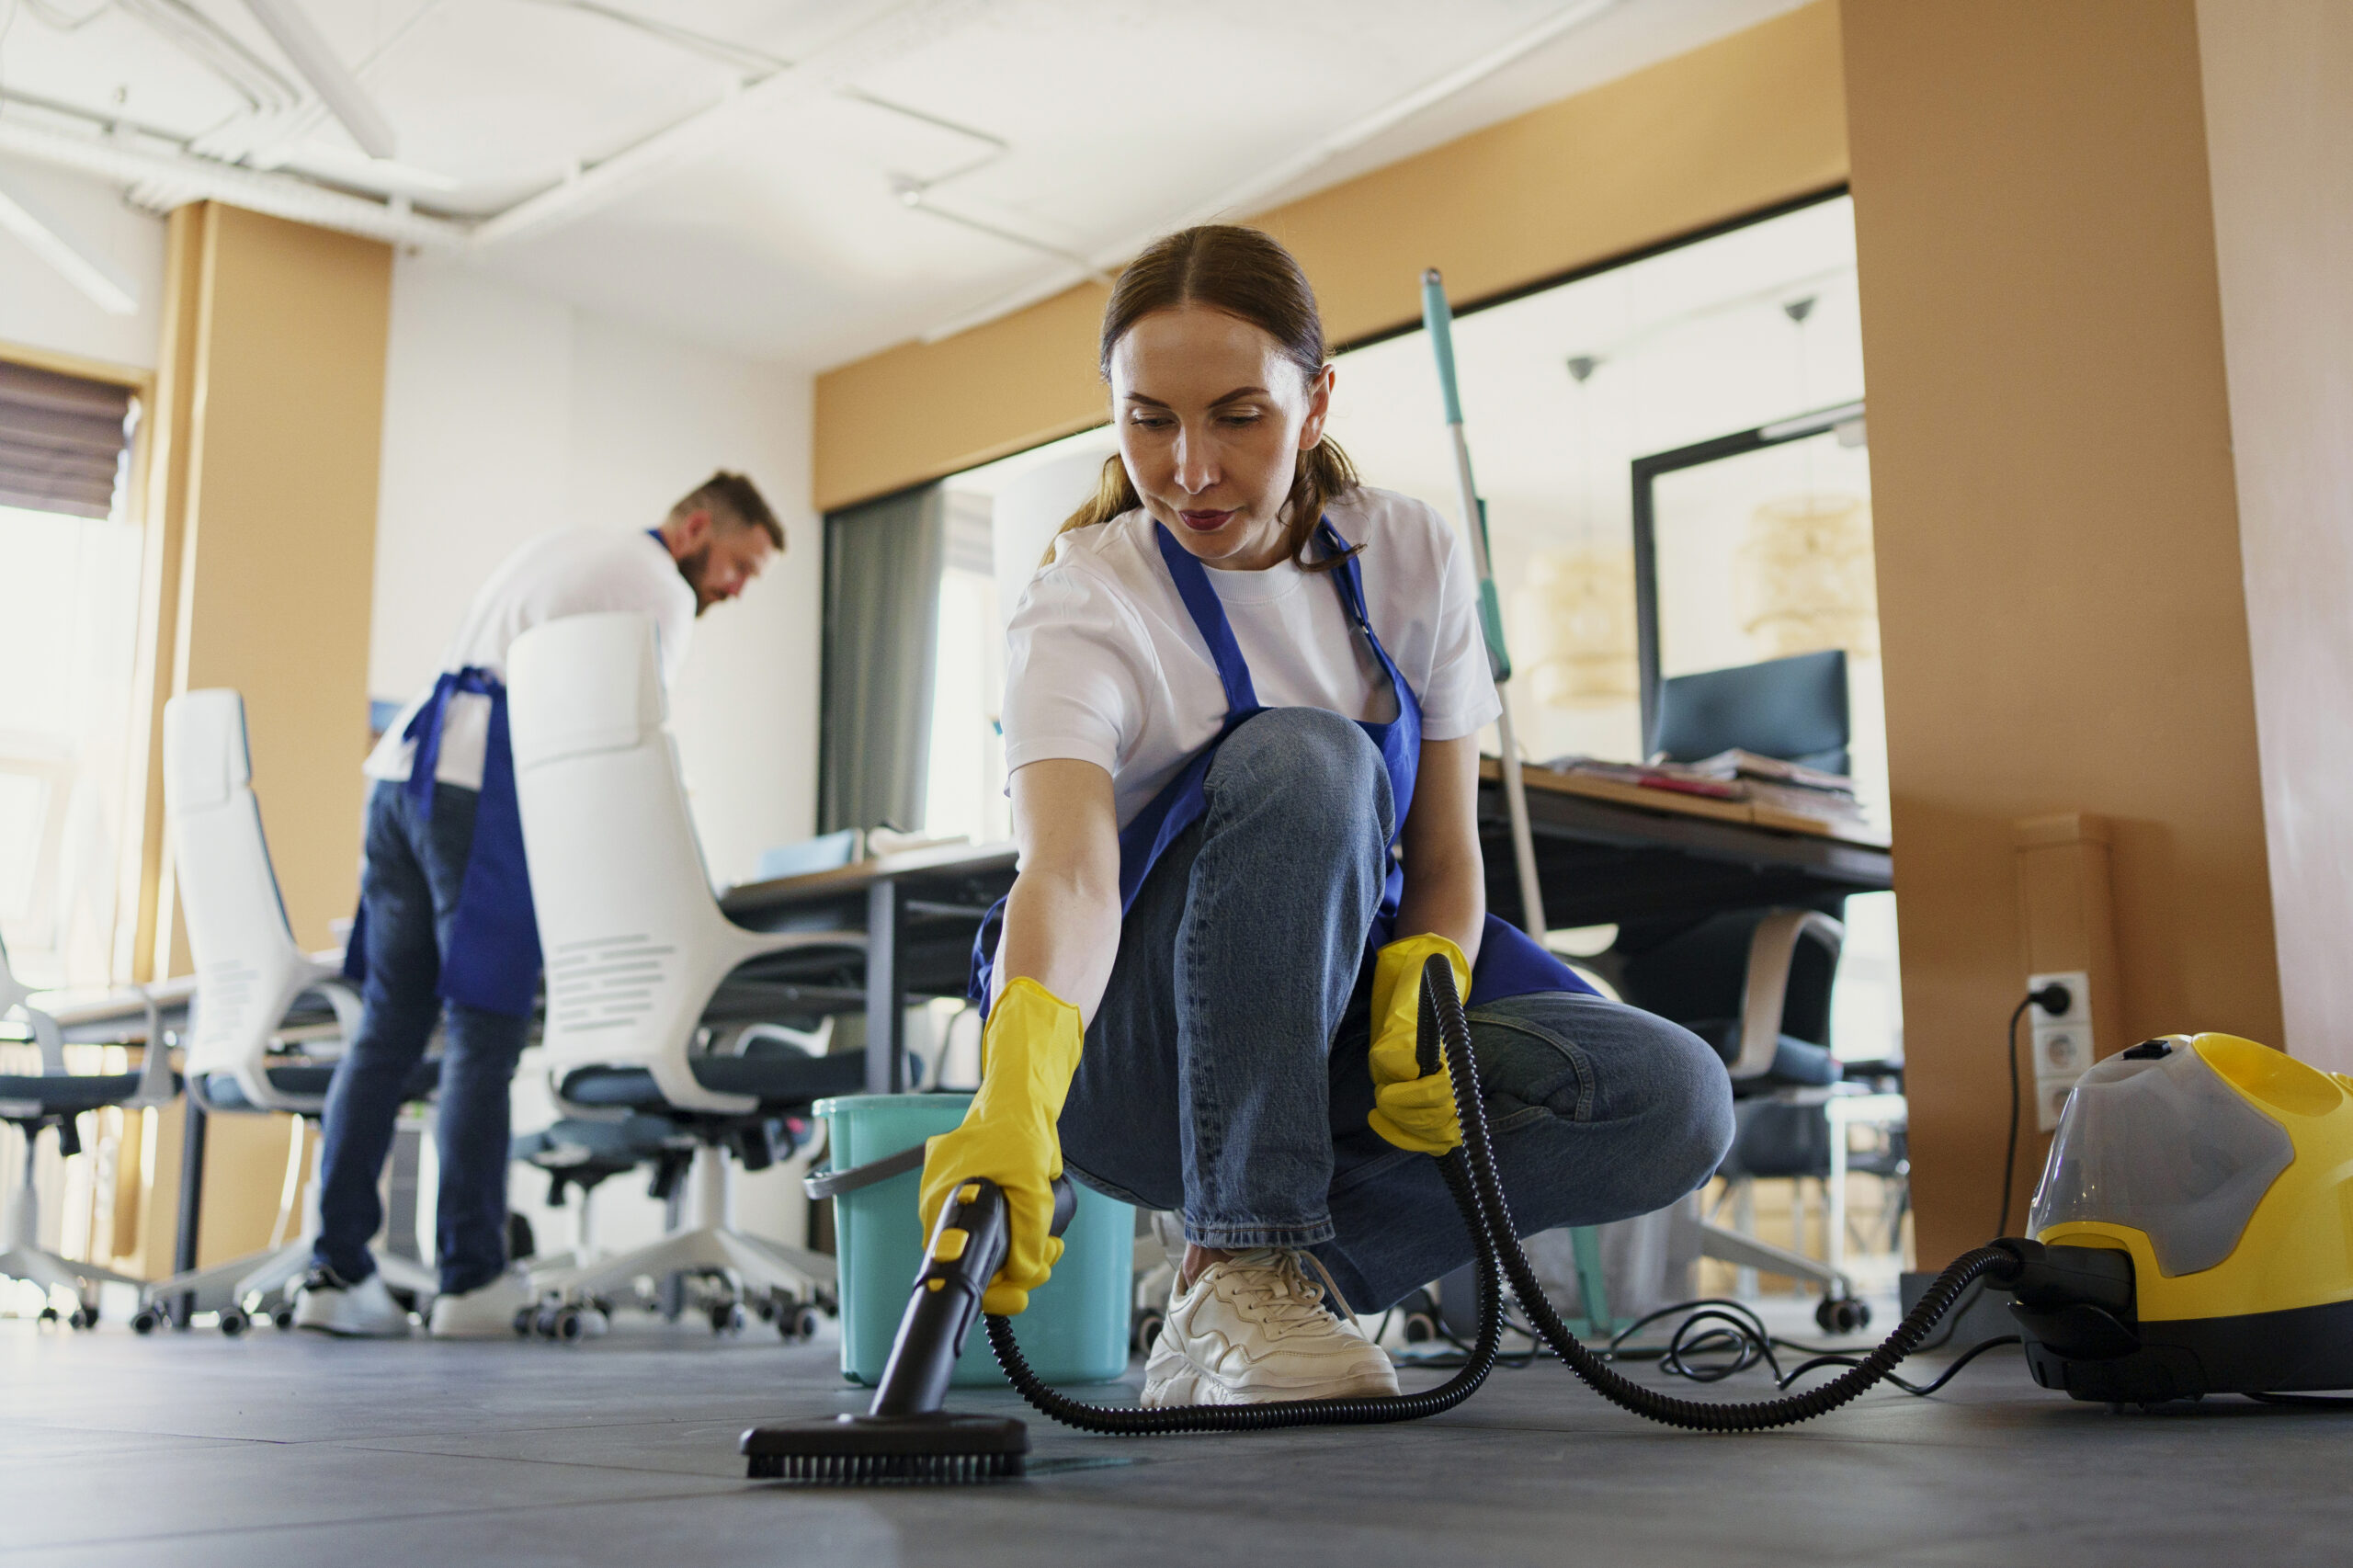 hether you need a one-off deep clean or regular maintenance cleaning, we are here to provide a personalised service that meets and exceeds your expectations.   